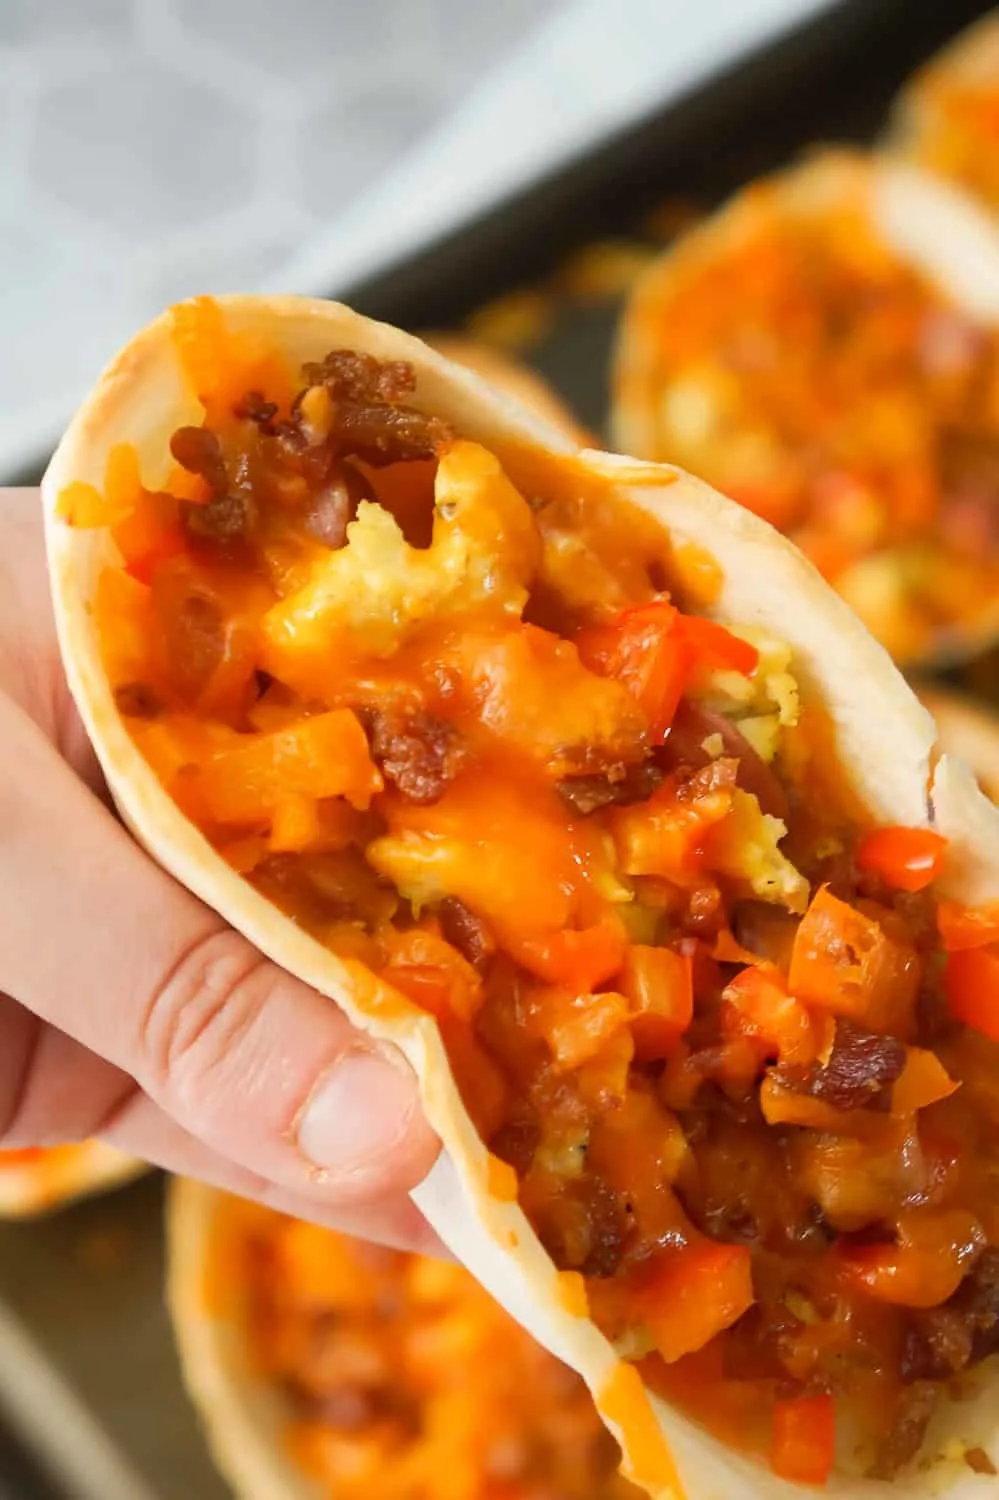 Sausage and Egg Breakfast Tacos are a fun and easy breakfast recipe. These breakfast tacos are made in Old El Paso tortilla bowls and loaded with eggs, maple breakfast sausage, cheddar cheese, sweet bell peppers and bacon.